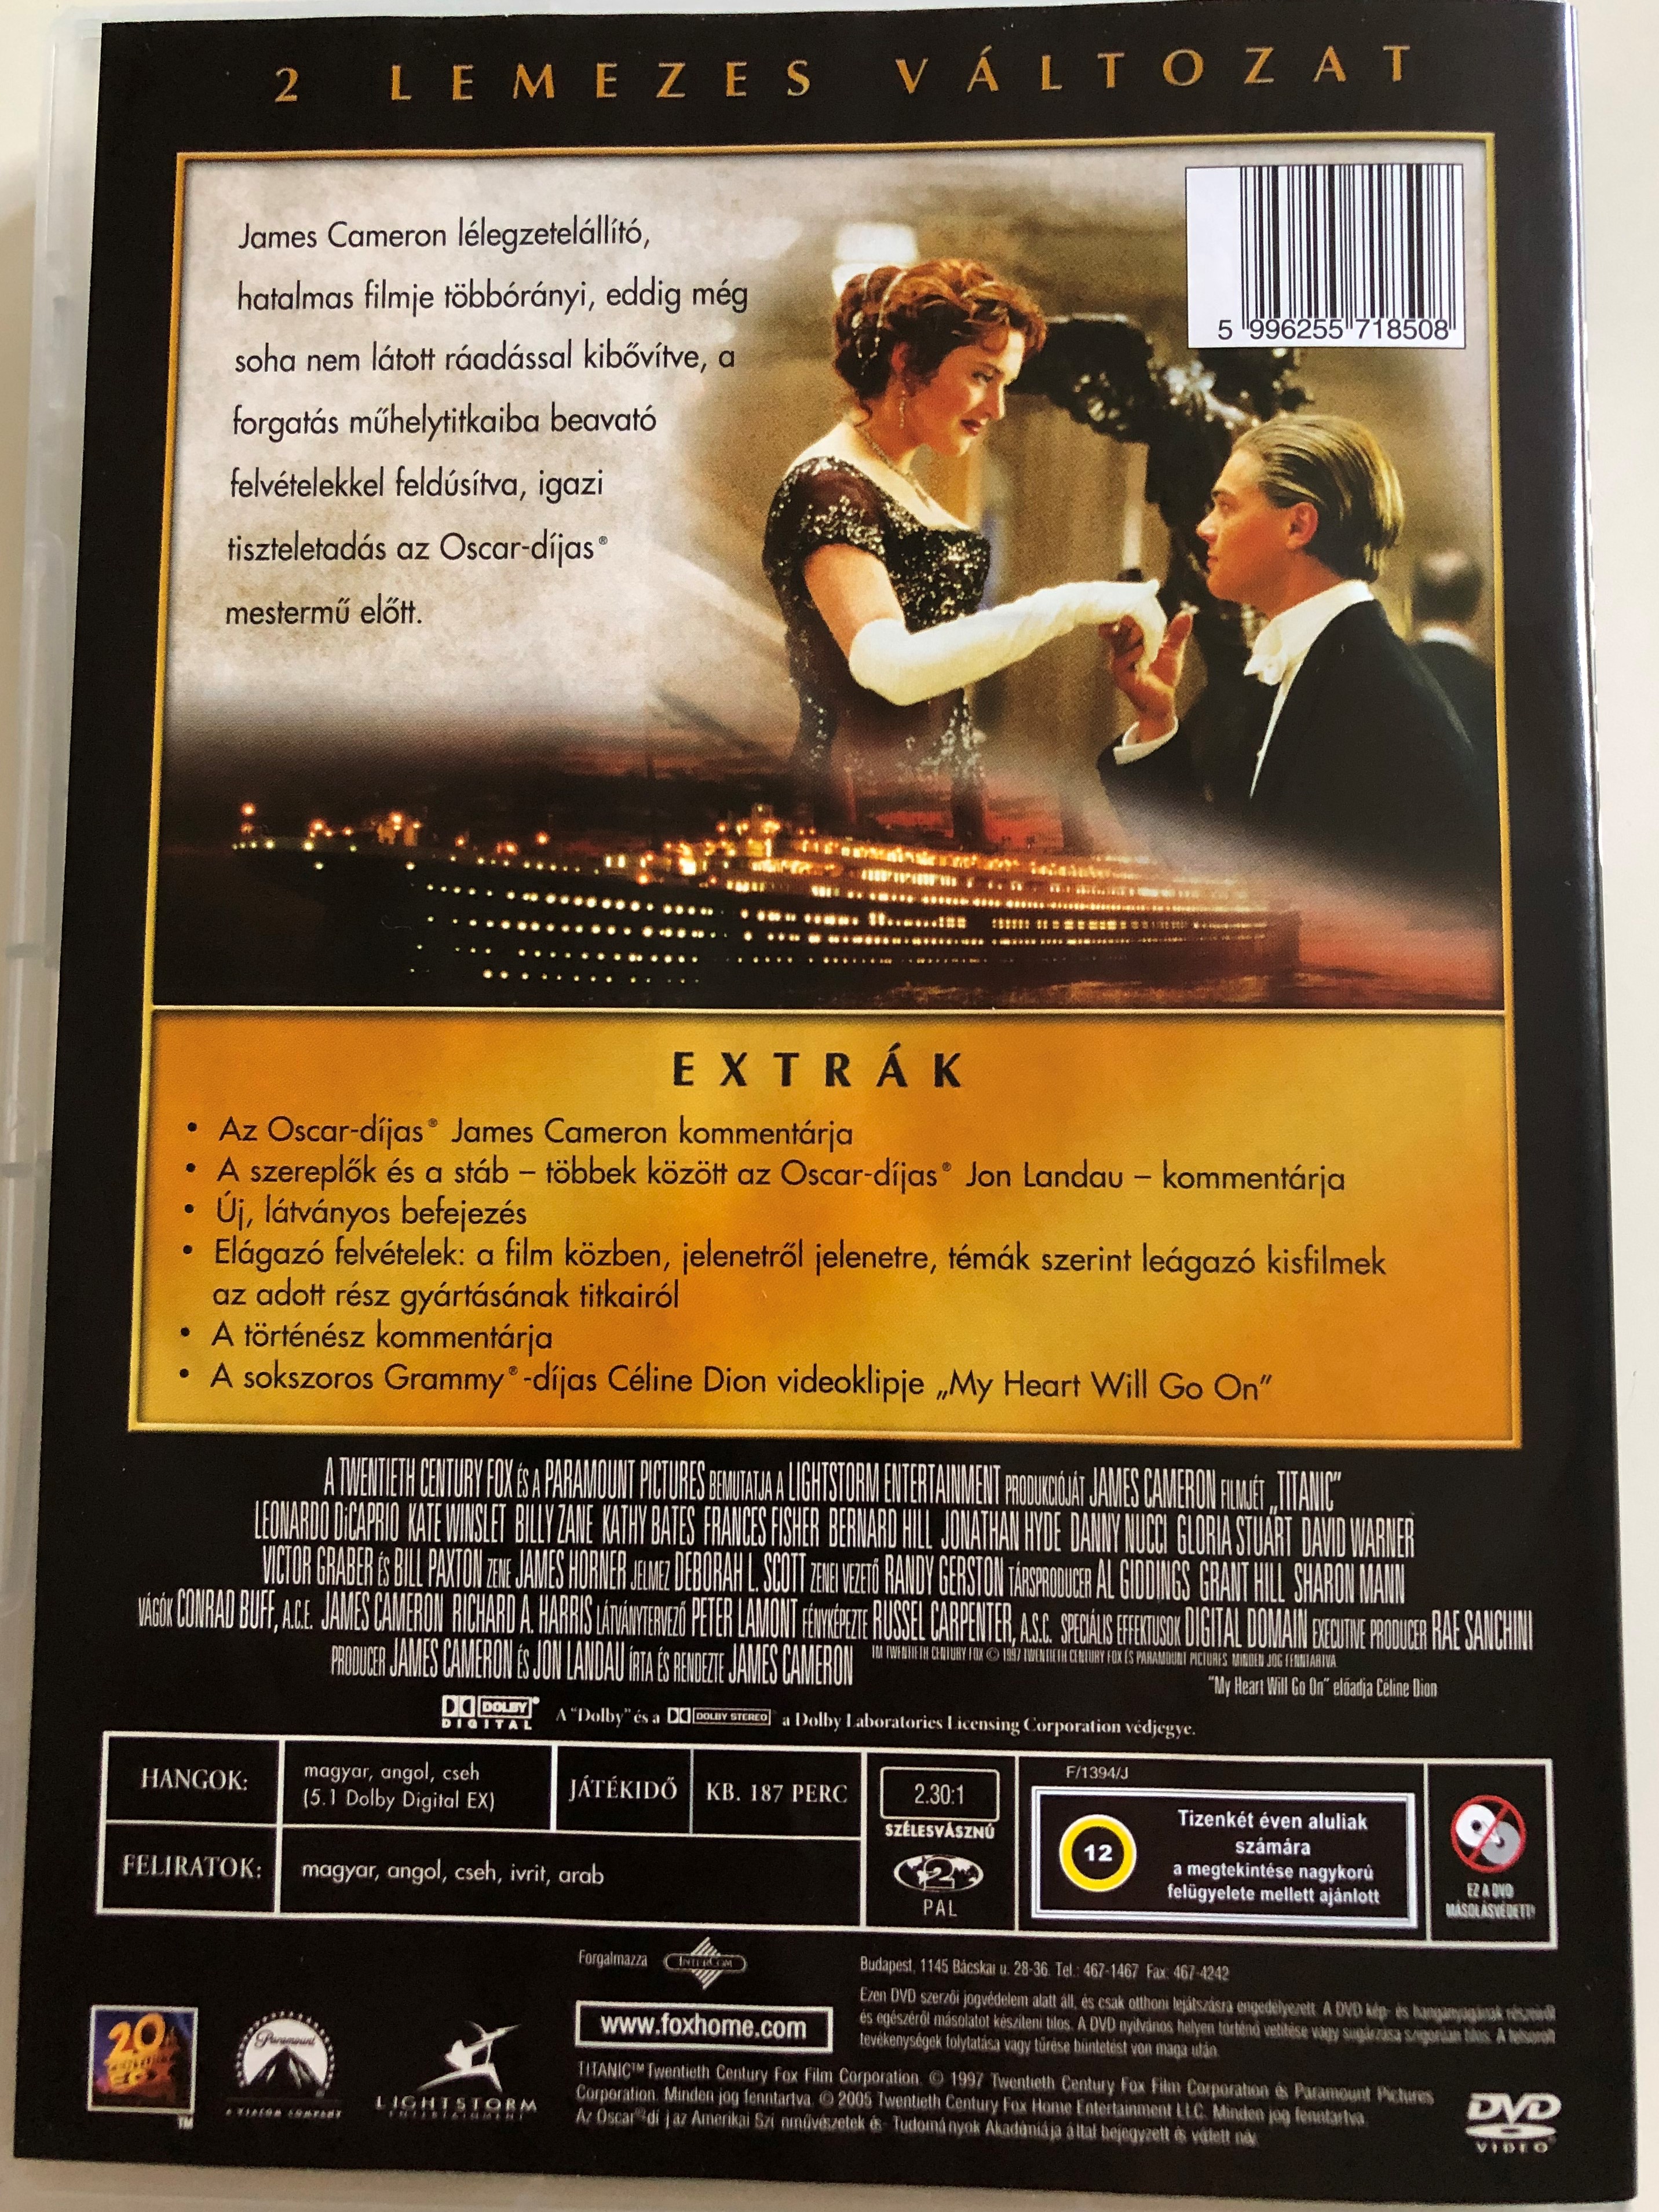 titanic-1997-dvd-deluxe-collectors-edition-2-dvd-directed-by-james-cameron-starring-leonardo-dicaprio-kate-winslet-billy-zane-kathy-bates-frances-fisher-bernard-hill-4-.jpg